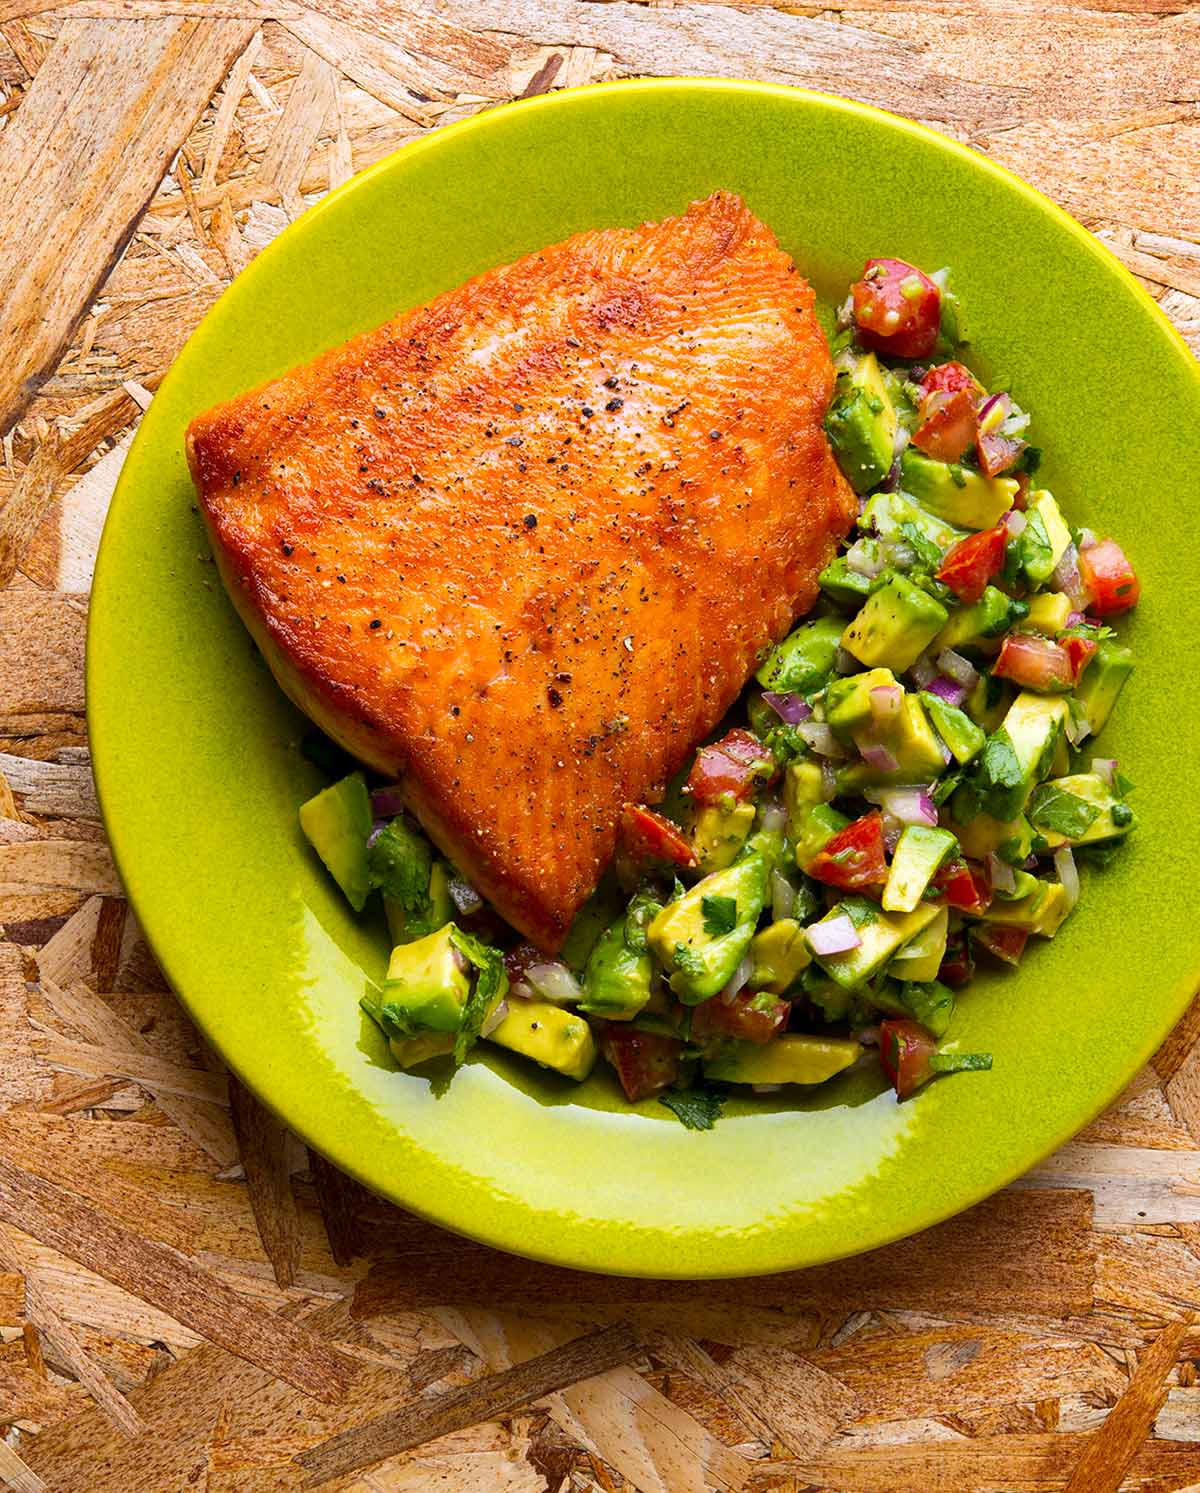 Seared salmon with avocado salsa on a plate